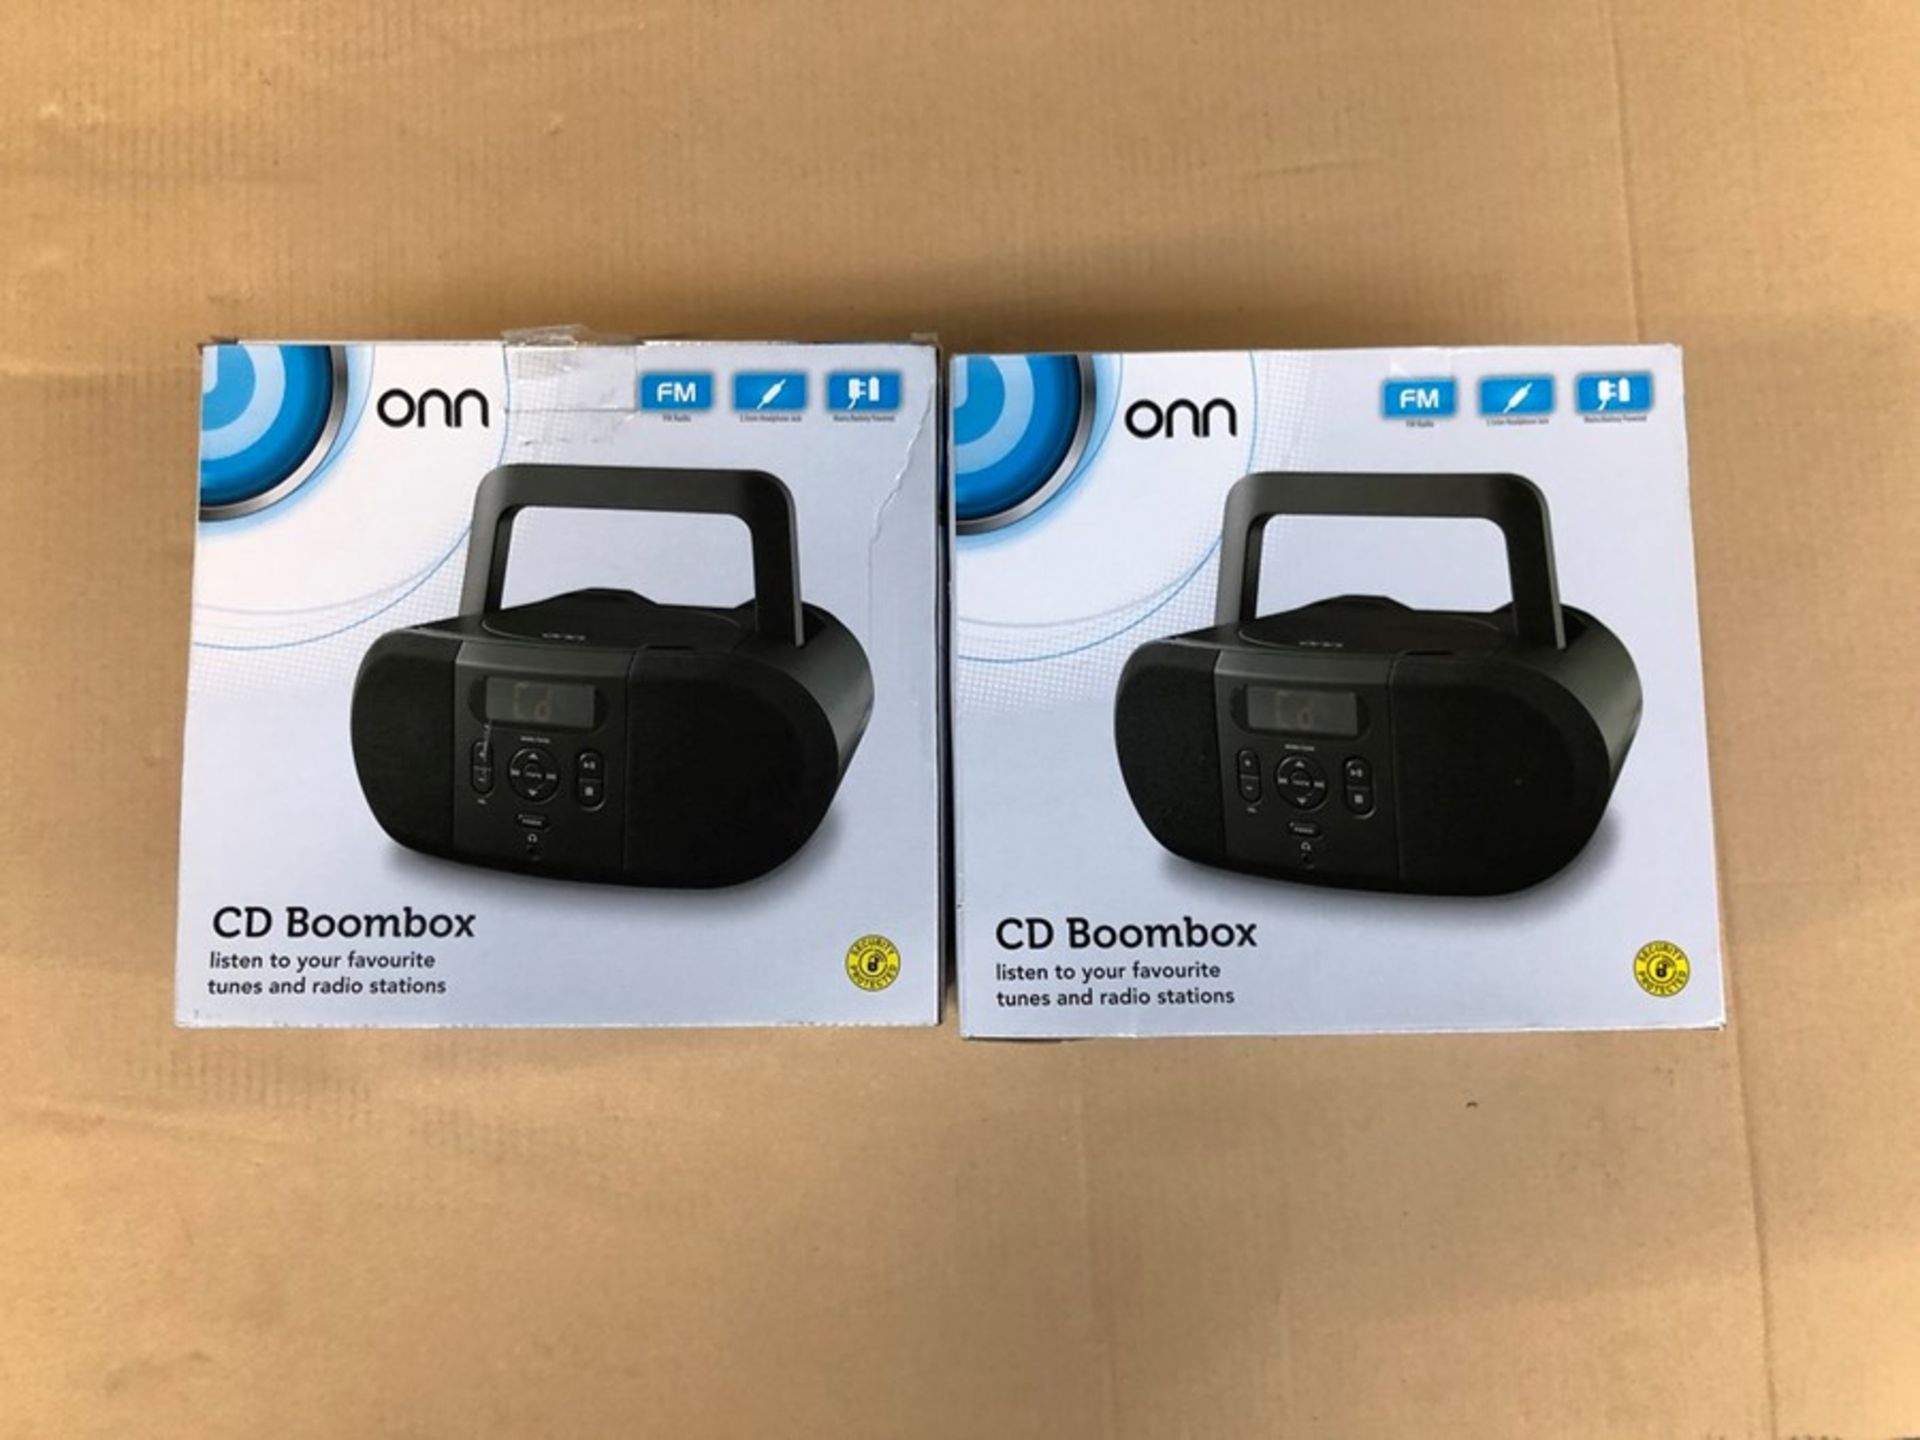 1 LOT TO CONTAIN 2 BOXED ONN CD BOOMBOXES IN BLACK / BL - 8740 / RRP £40.00 (PUBLIC VIEWING